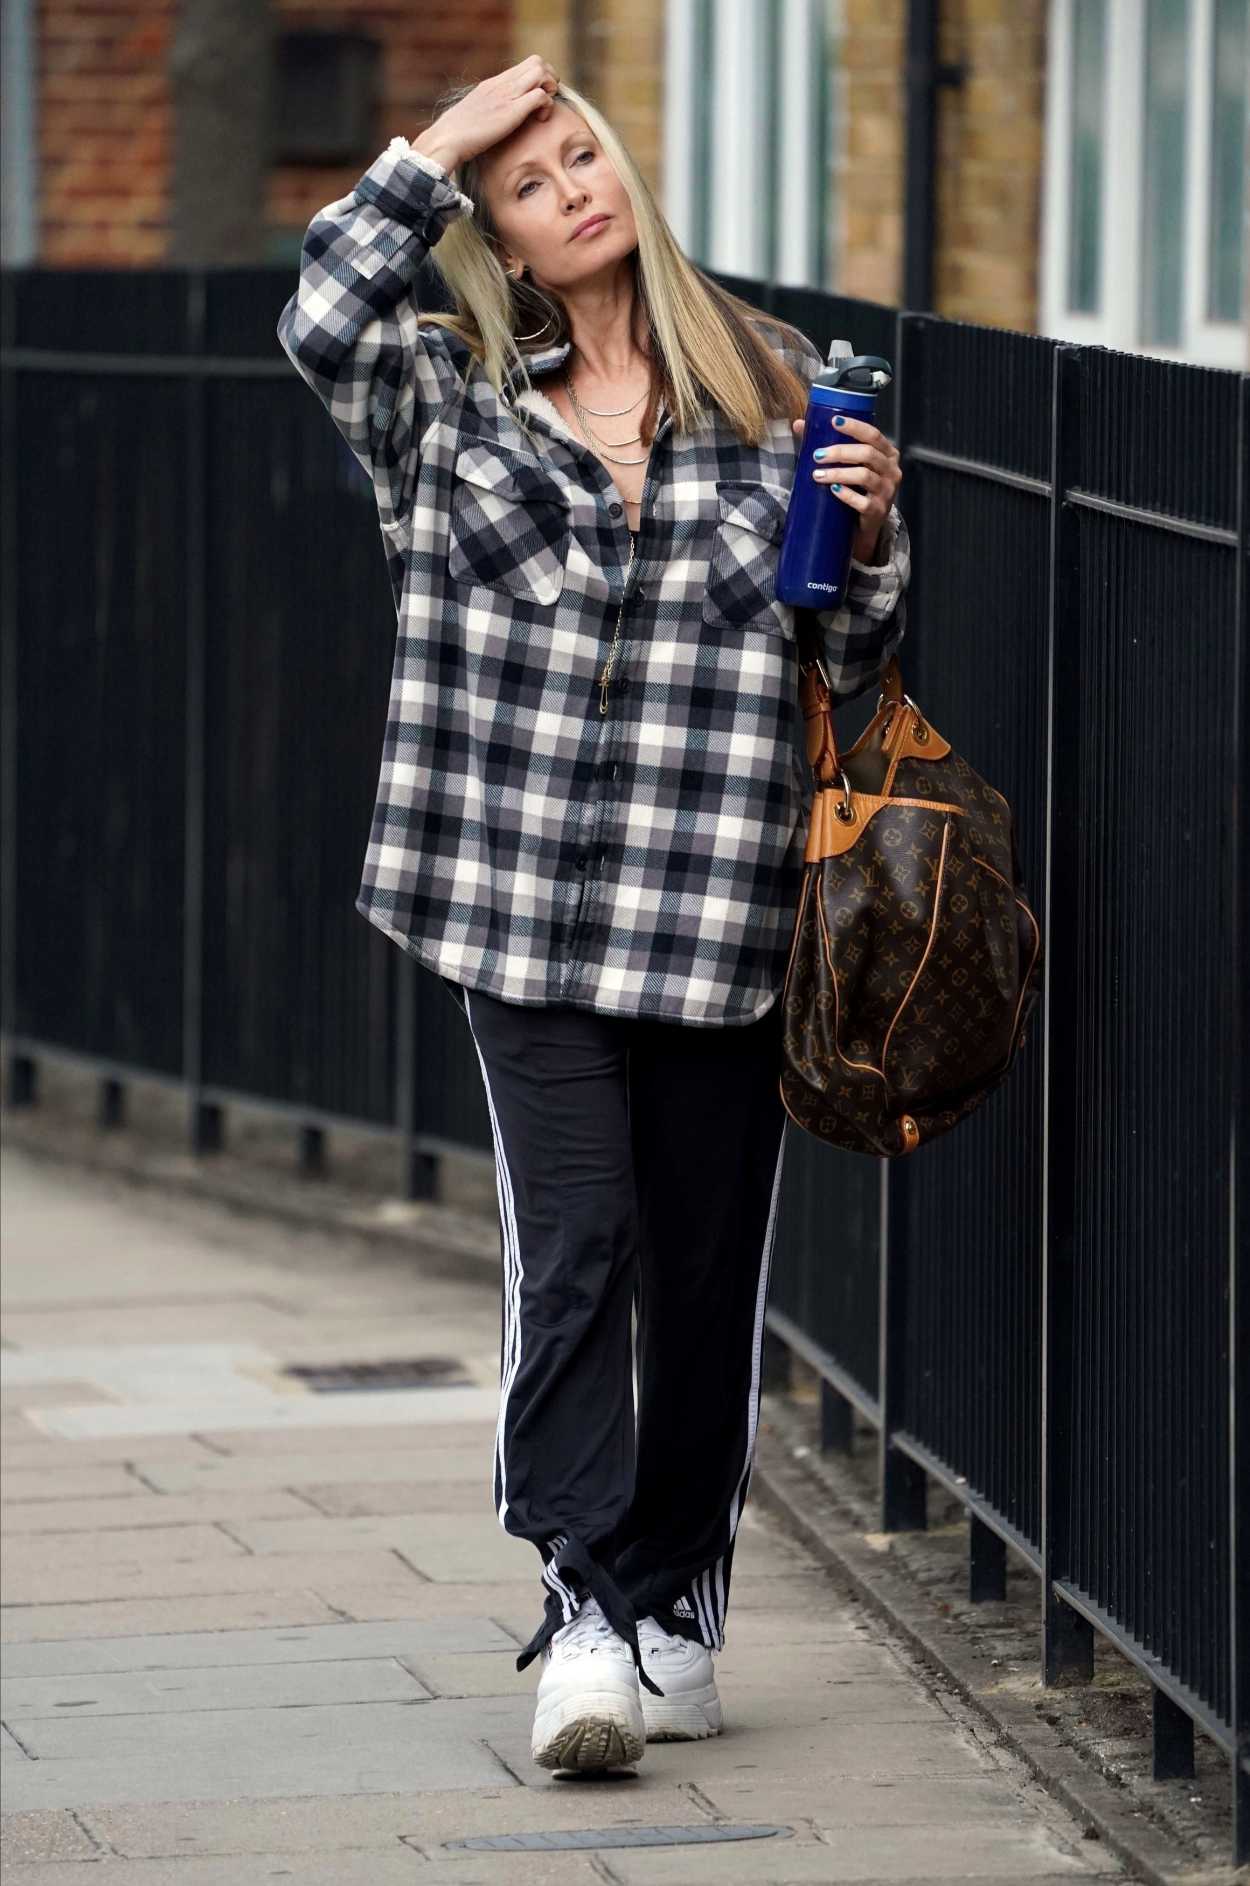 Caprice Bourret in a Plaid Shirt Was Seen Out in London 07/09/2020 ...